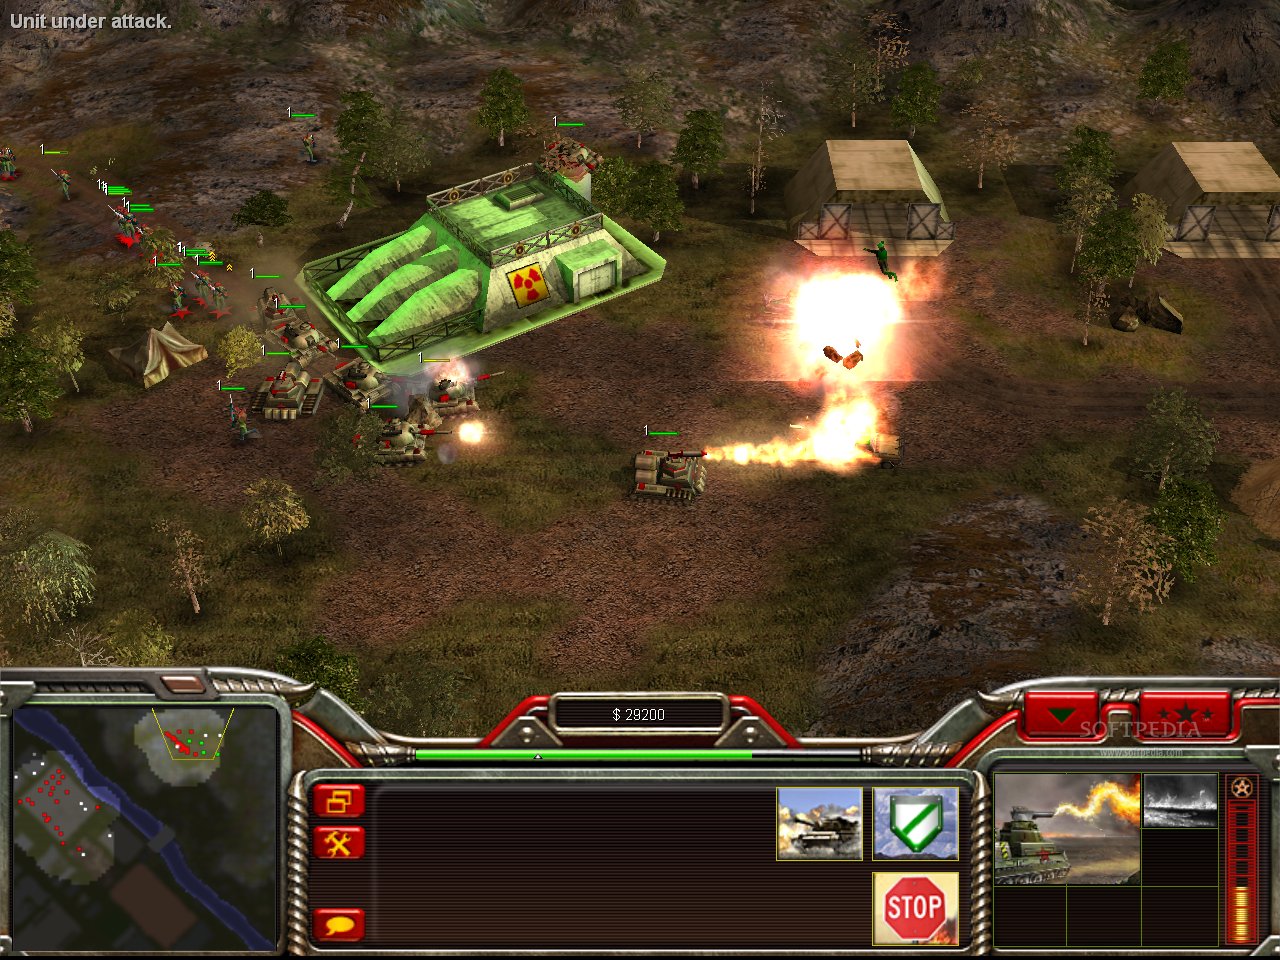 Command And Conquer: Generals free - Download latest